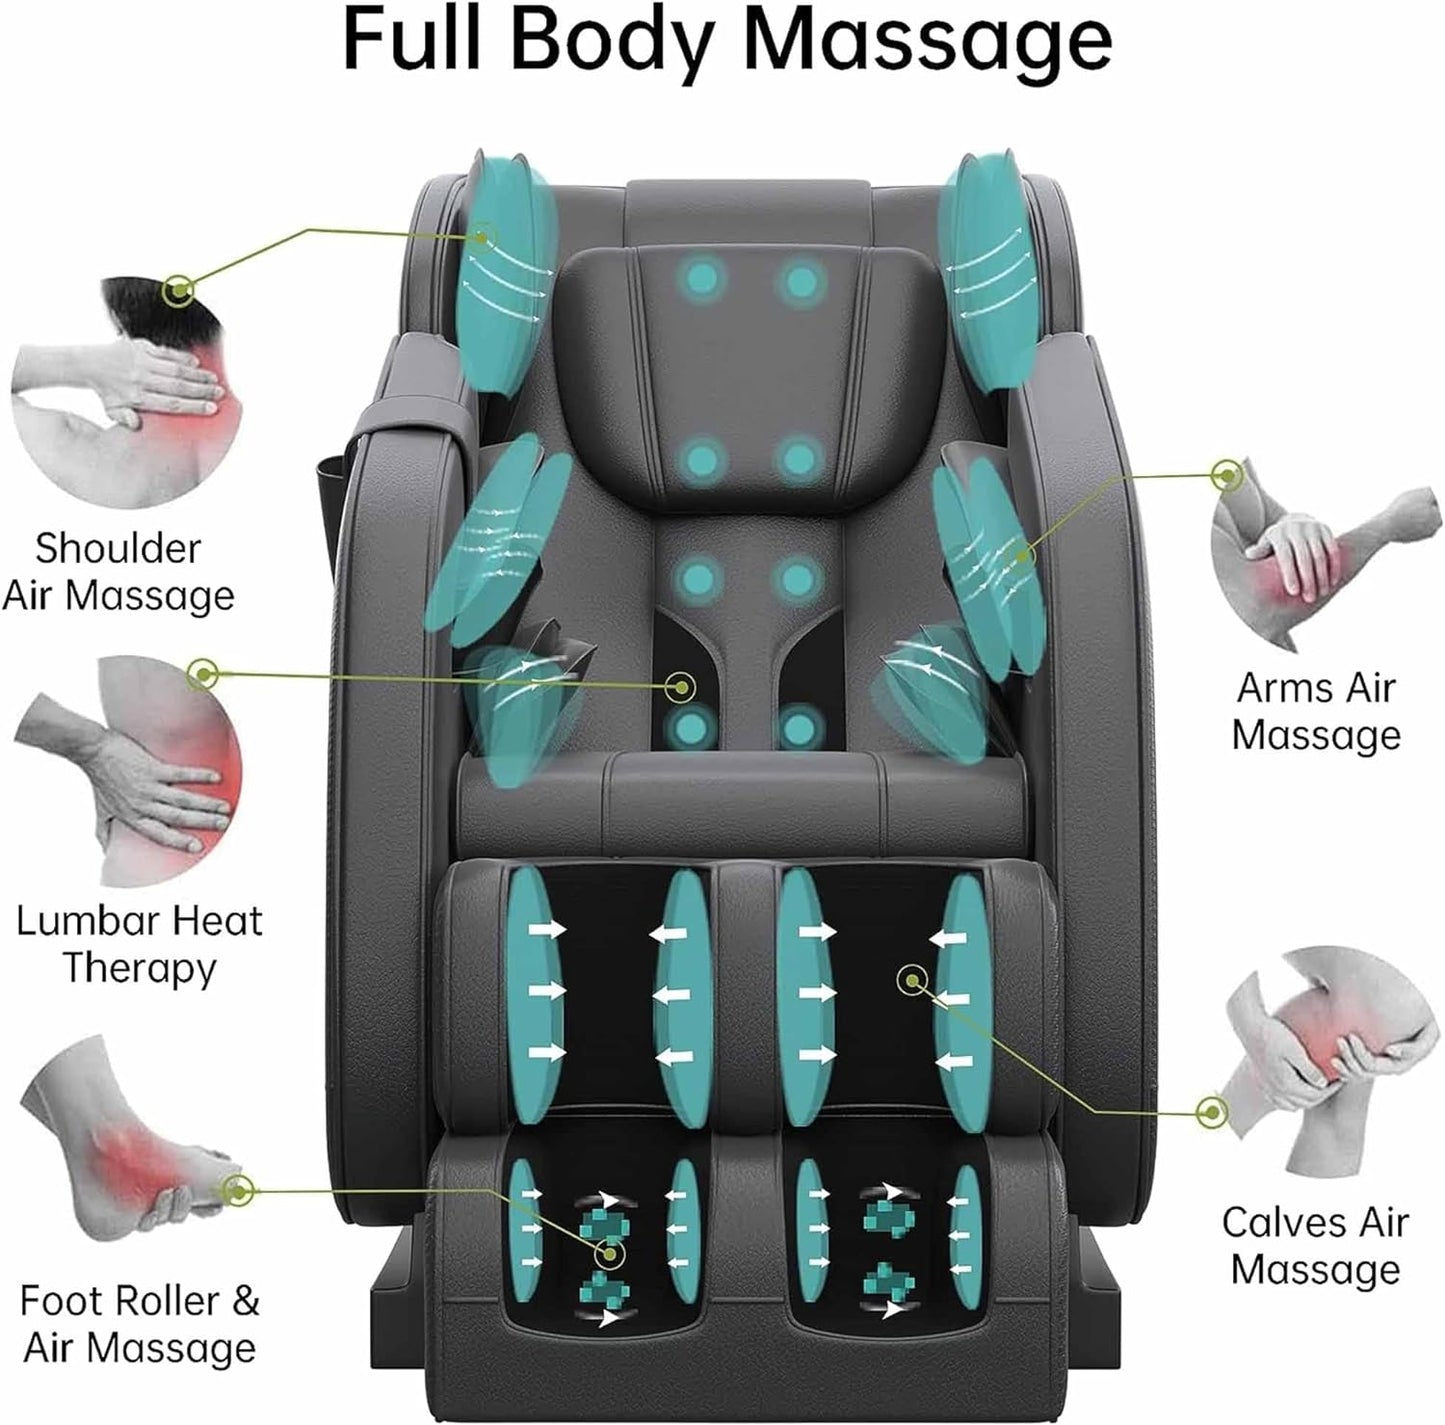 Massage Chair - Bed Bath & Beyond Realrelax Favor-MM350 Heated Full Body Massage Chair with Zero Gravity Mode and Bluetooth Music Player Black